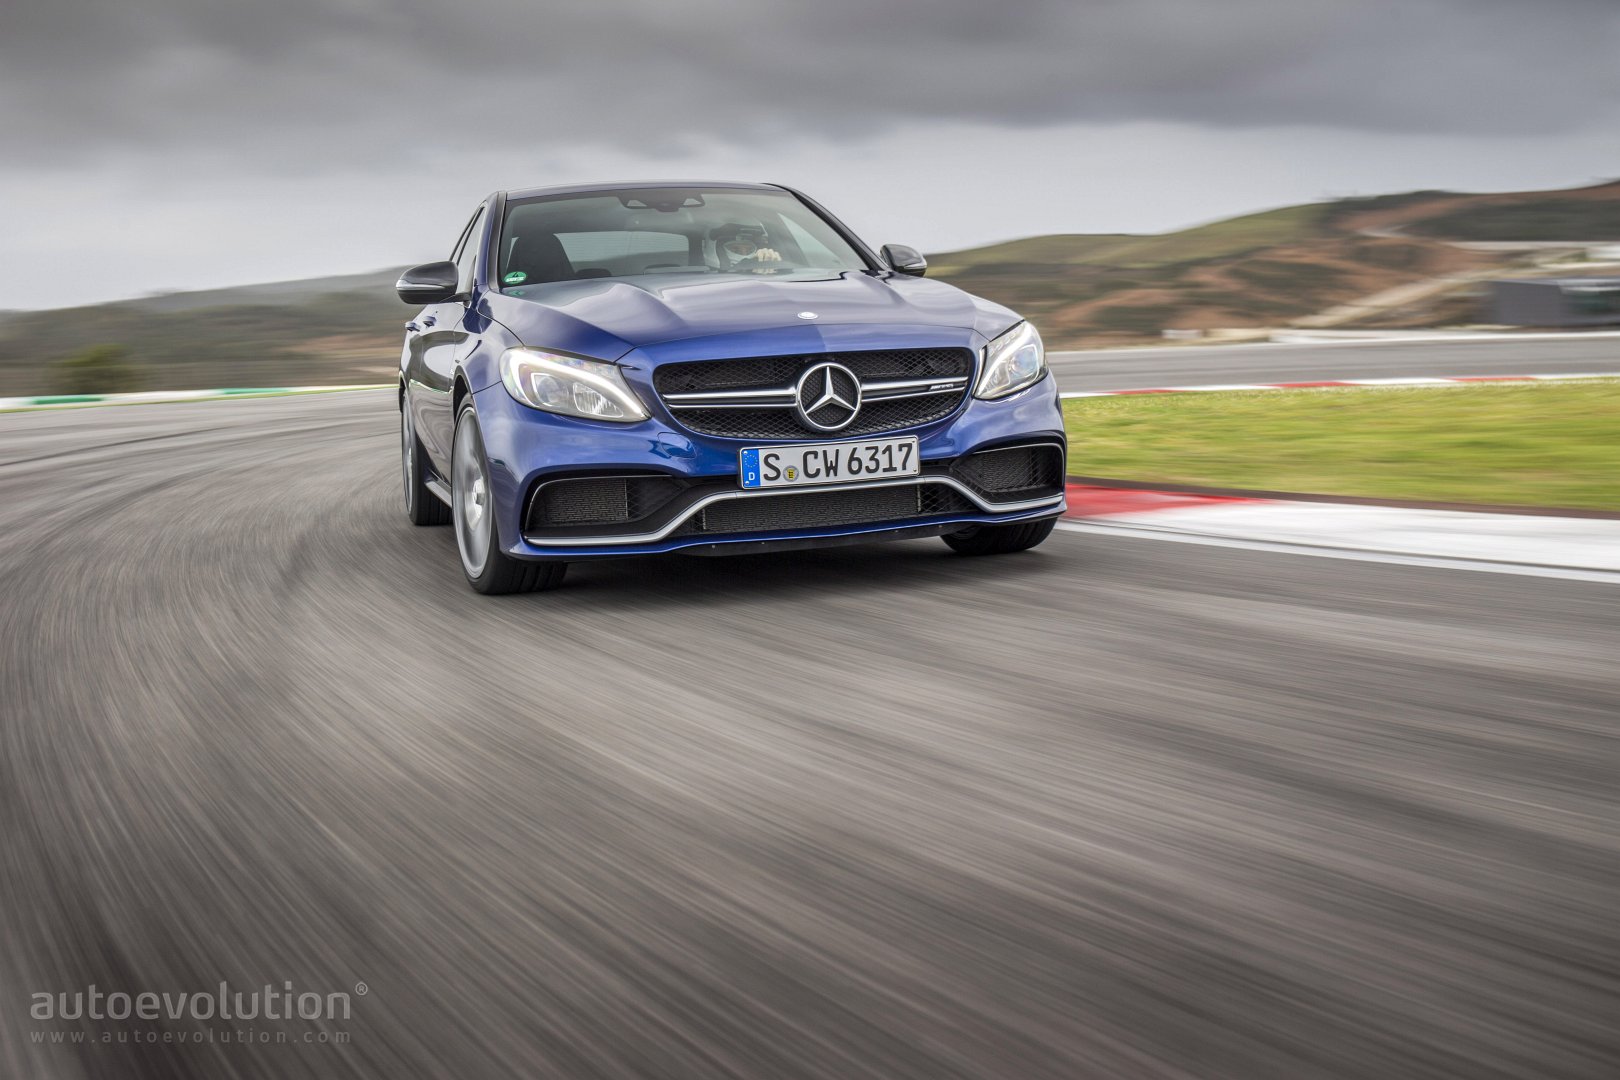 Mercedes Amg C63 And S HD Wallpaper The